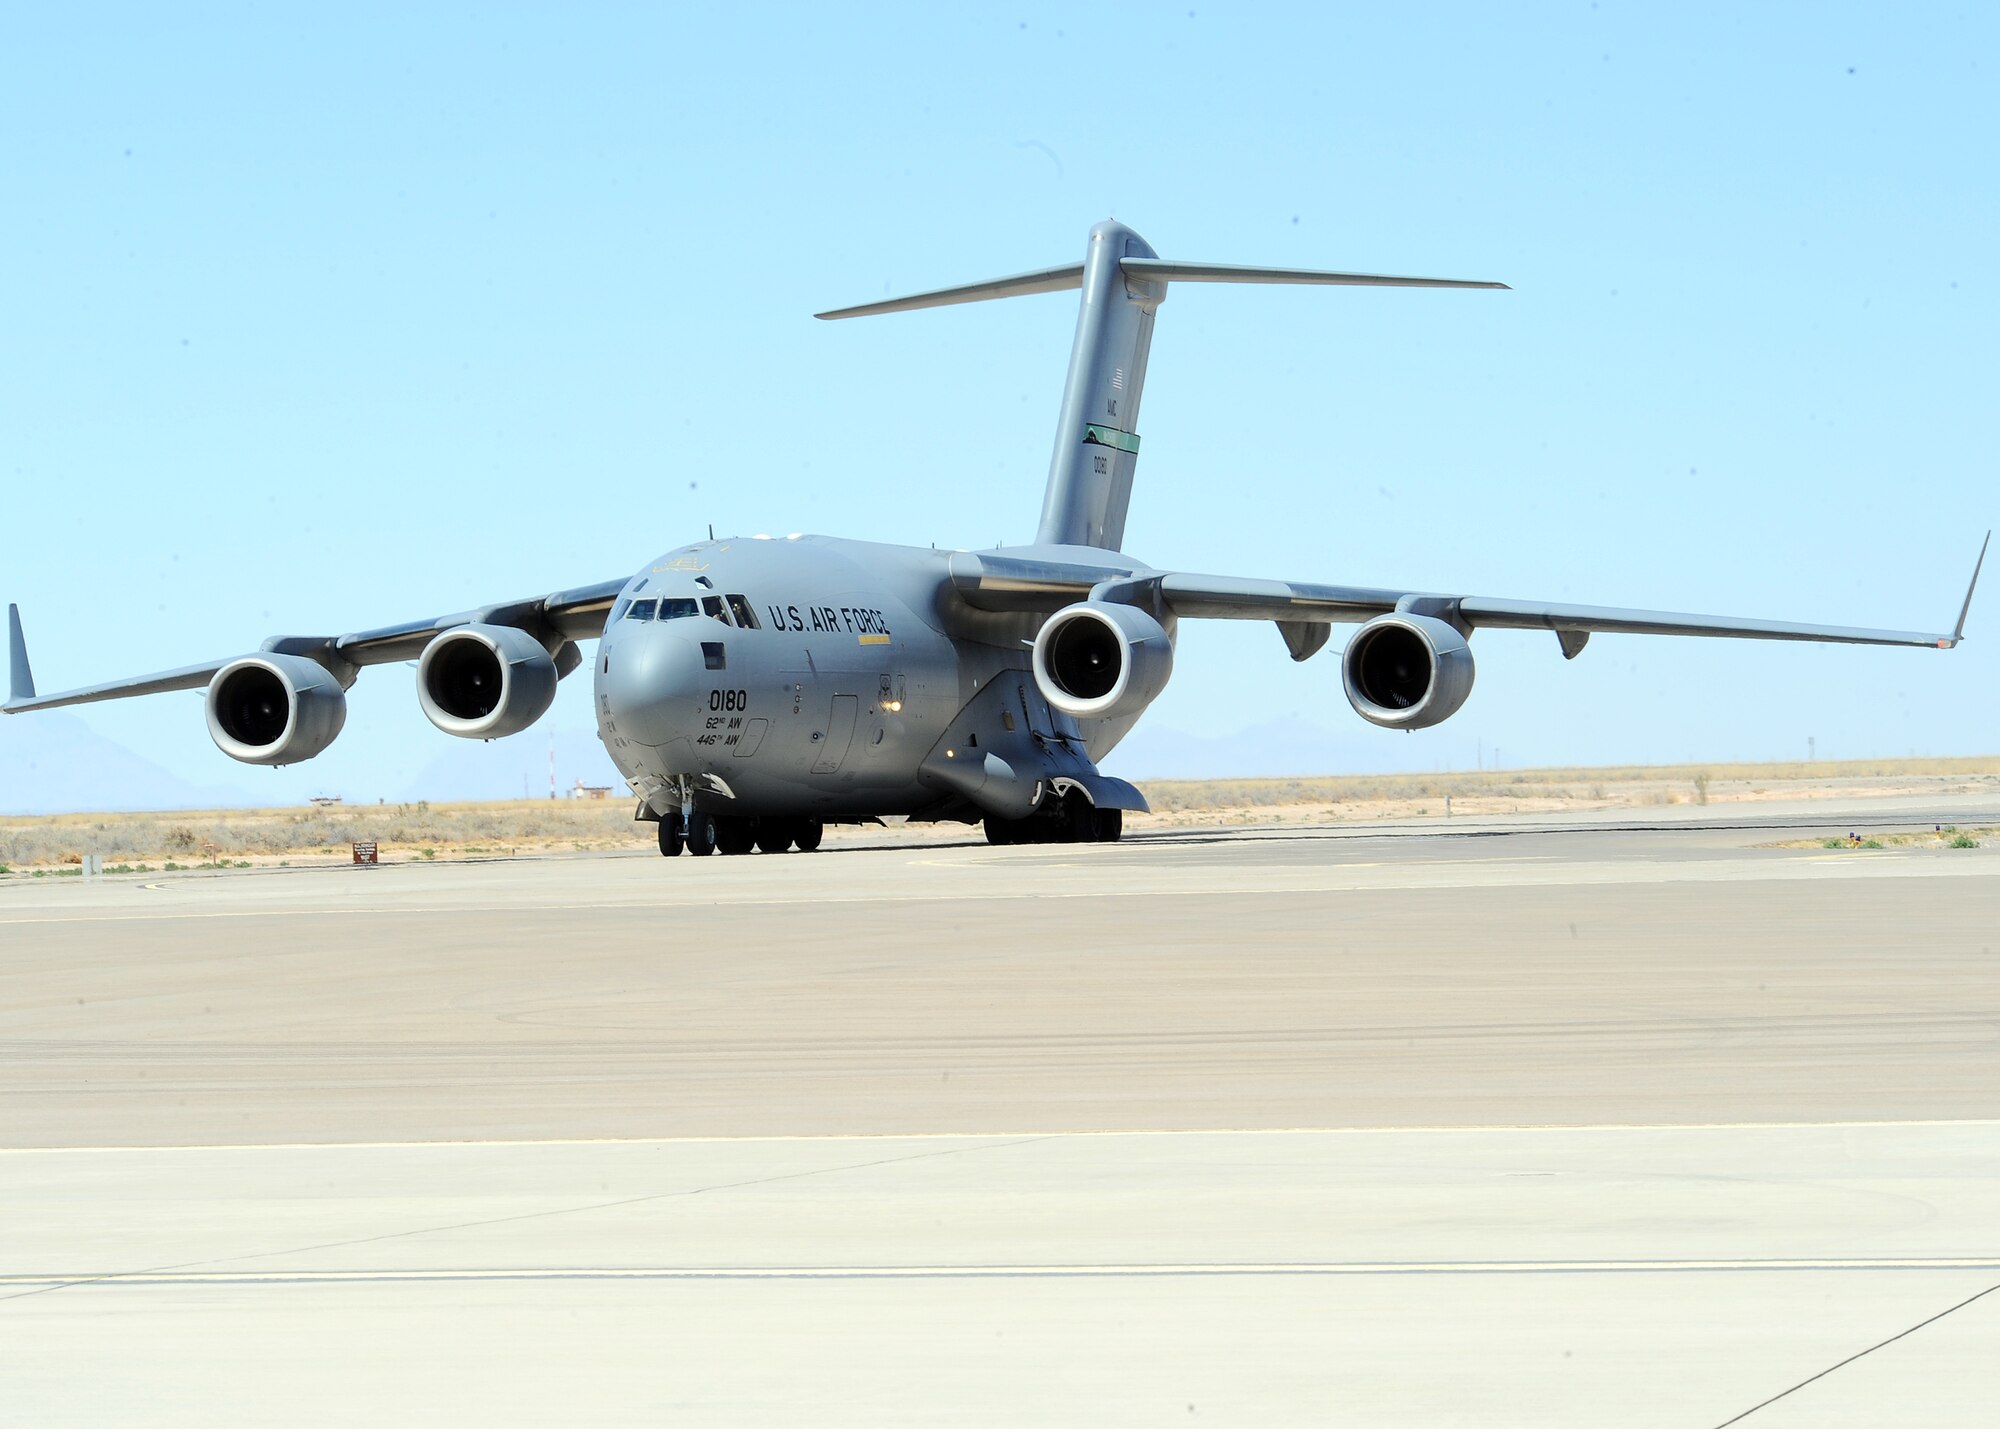 A C-17 from McChord Air Force Base Wash., taxies into Holloman Air Force Base, N.M., March 3. The C-17 was here to pick up a 60,000 pound aircraft loader that is being deployed to CENTAF to assist with cargo operations in the AOR. (U.S. Air Force photo/ Airman 1st Class DeAndre Curtiss)